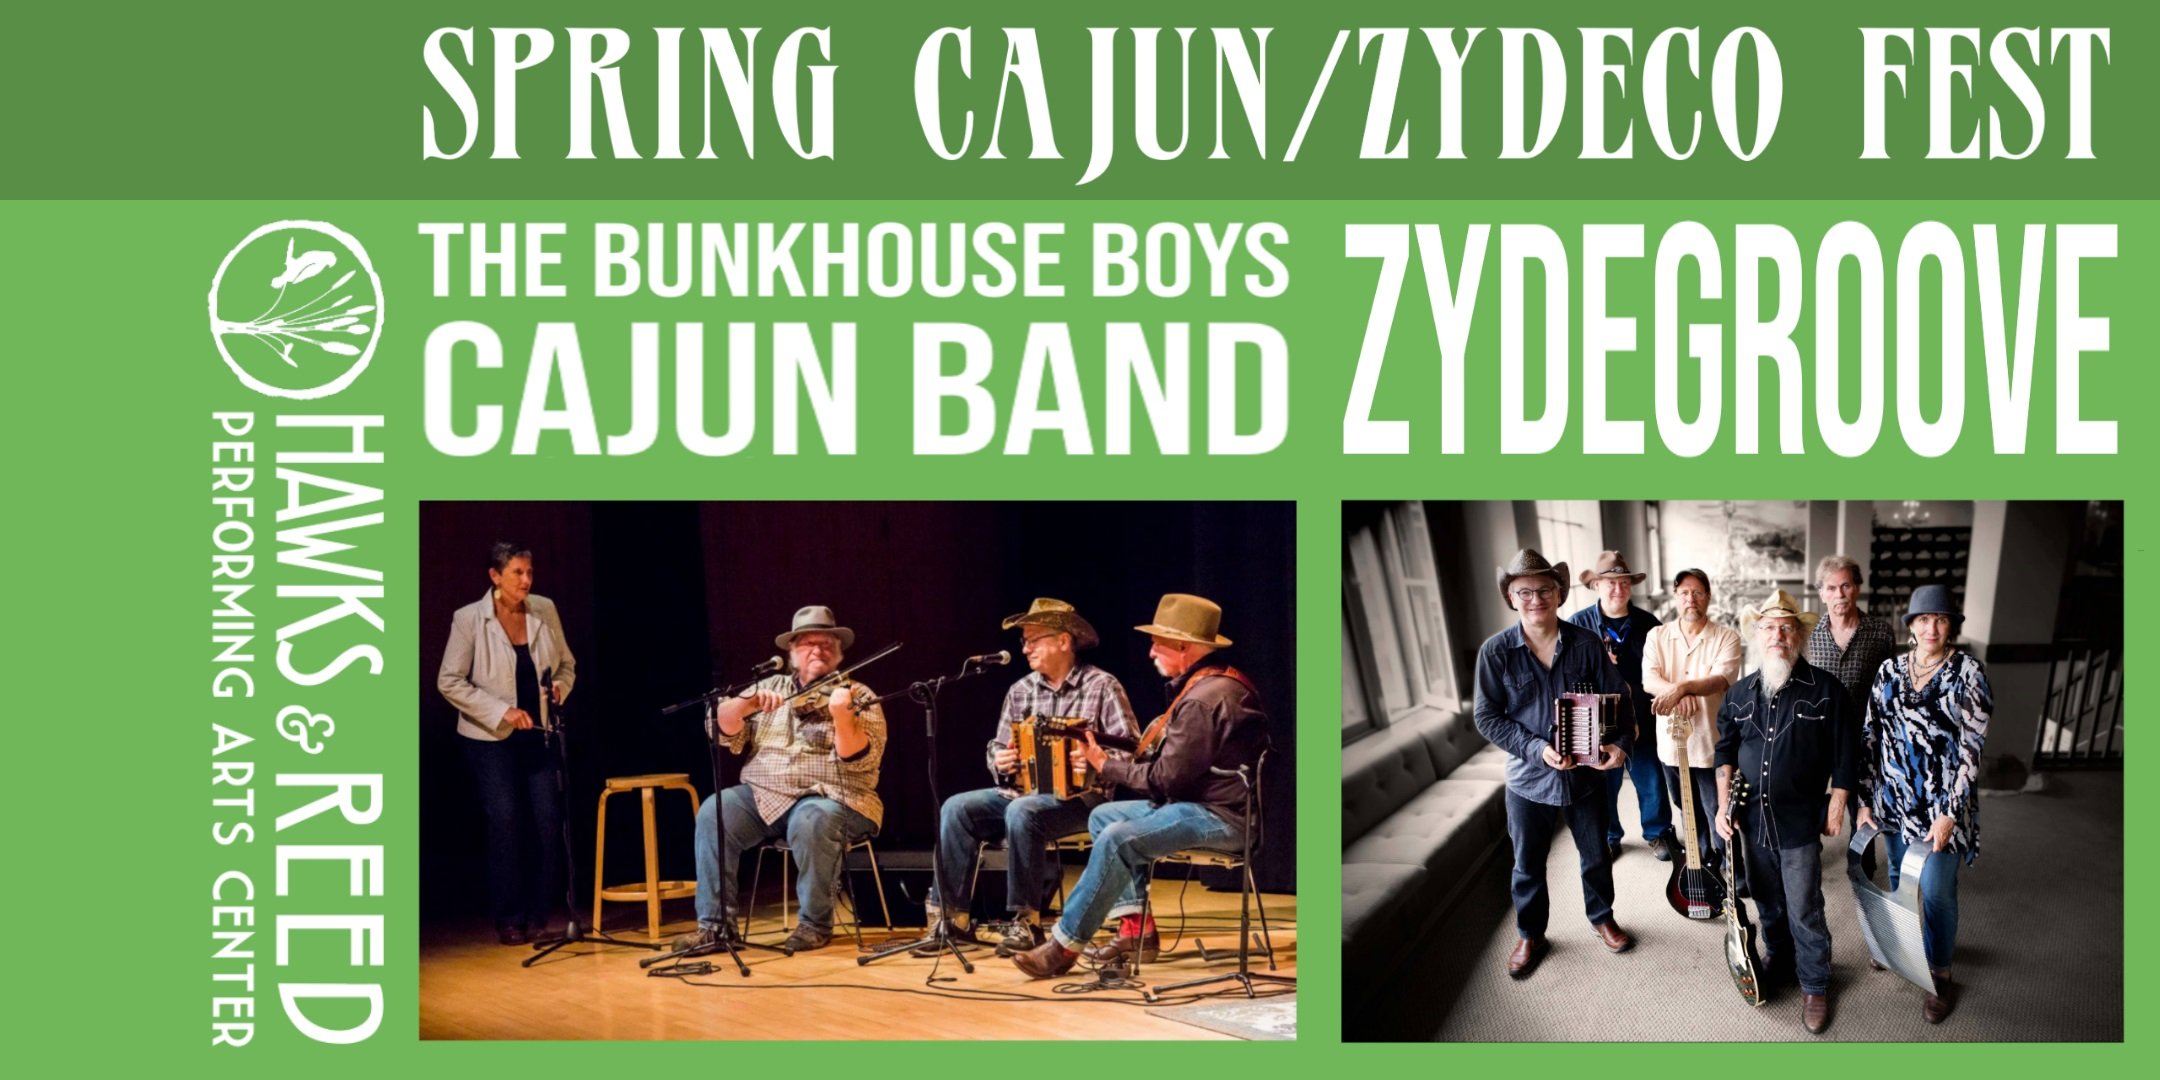 Spring Cajun/Zydeco Fest with Bunkhouse Boys Cajun Band and Zydegroove